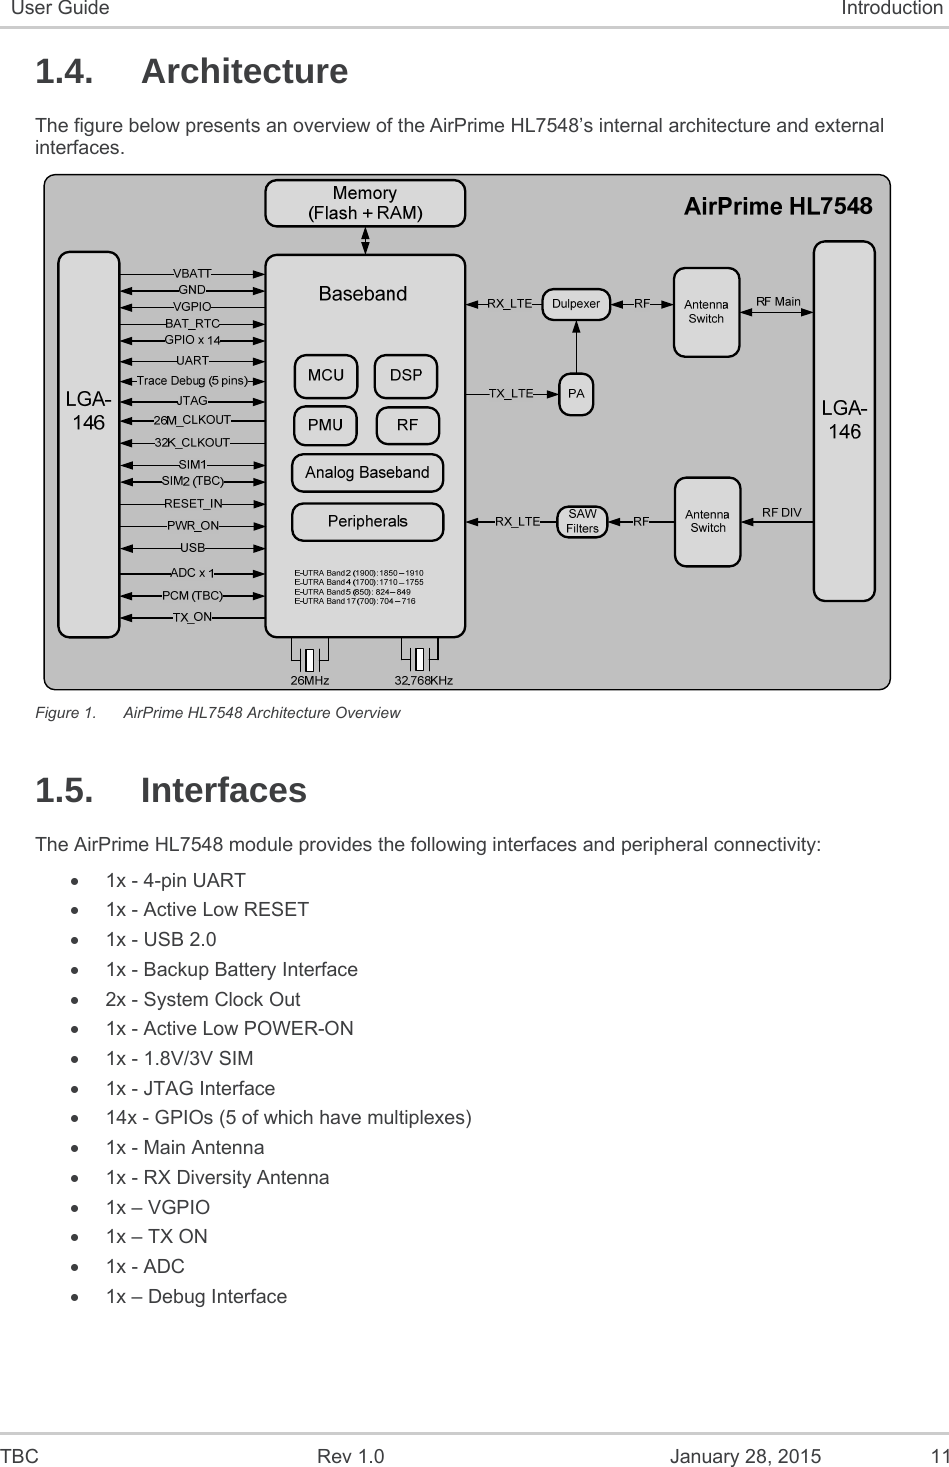  TBC  Rev 1.0  January 28, 2015  11 User Guide  Introduction 1.4. Architecture The figure below presents an overview of the AirPrime HL7548’s internal architecture and external interfaces.   Figure 1.  AirPrime HL7548 Architecture Overview 1.5. Interfaces The AirPrime HL7548 module provides the following interfaces and peripheral connectivity:   1x - 4-pin UART   1x - Active Low RESET   1x - USB 2.0   1x - Backup Battery Interface   2x - System Clock Out   1x - Active Low POWER-ON   1x - 1.8V/3V SIM   1x - JTAG Interface    14x - GPIOs (5 of which have multiplexes)   1x - Main Antenna   1x - RX Diversity Antenna   1x – VGPIO   1x – TX ON   1x - ADC   1x – Debug Interface 